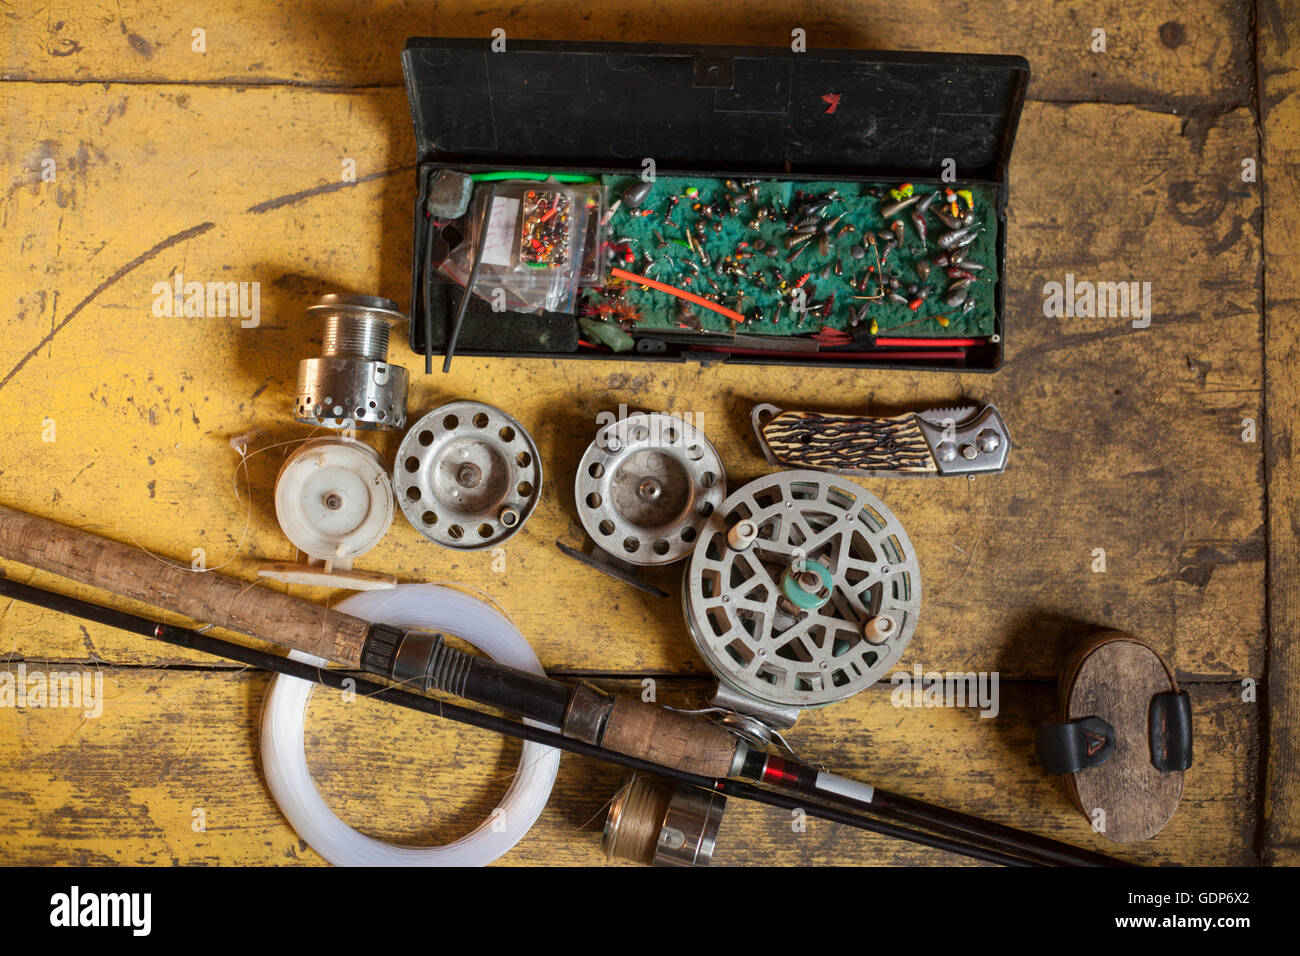 Overhead view of fishing rod and equipment on yellow shed floor Stock Photo